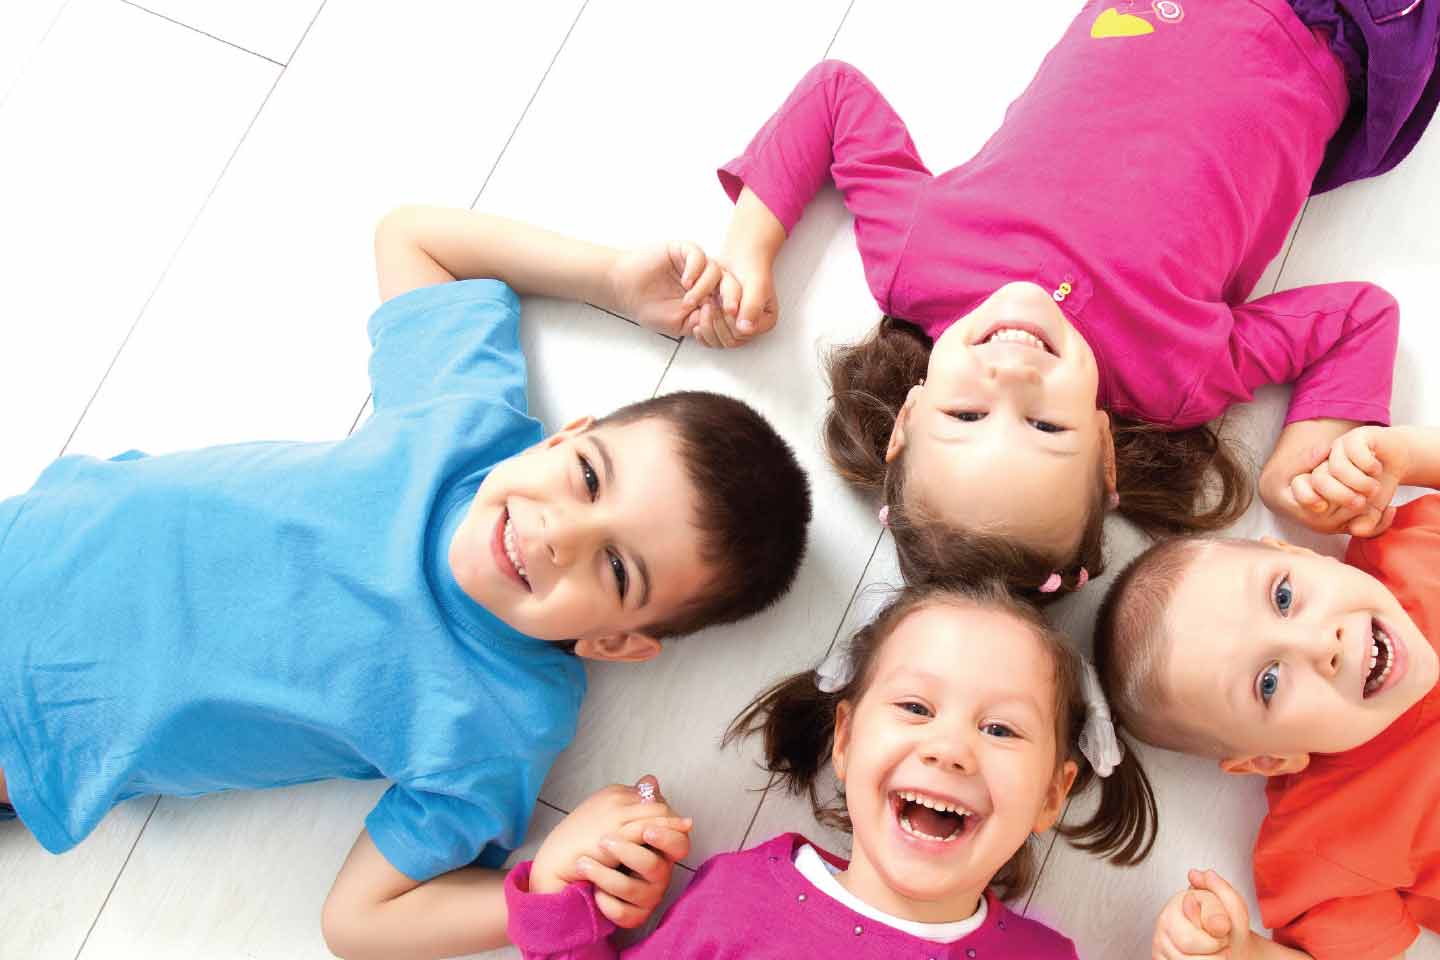 Kids lying down and smiling